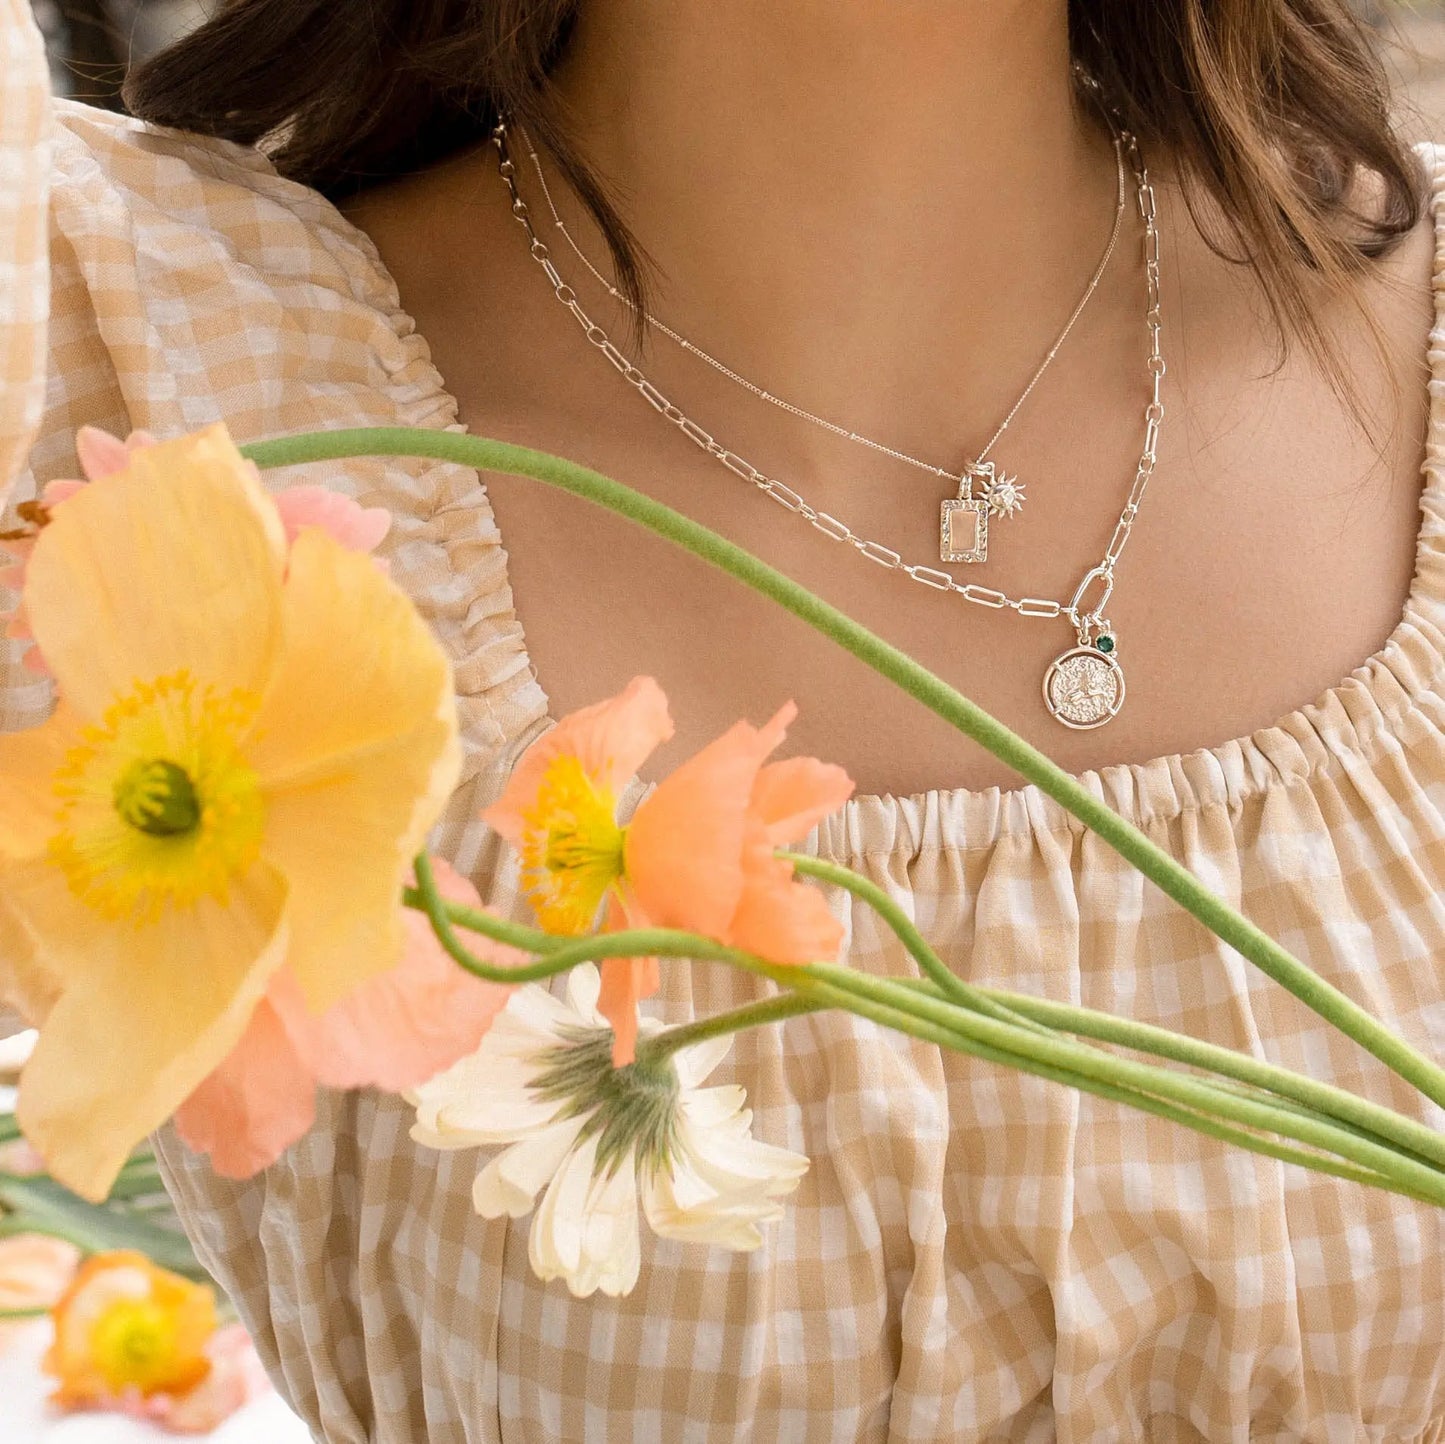  Fable Necklace - FABLE-NECKLACE_f1c9df1a-acfe-4b06-9136-db56521e40a1.jpg